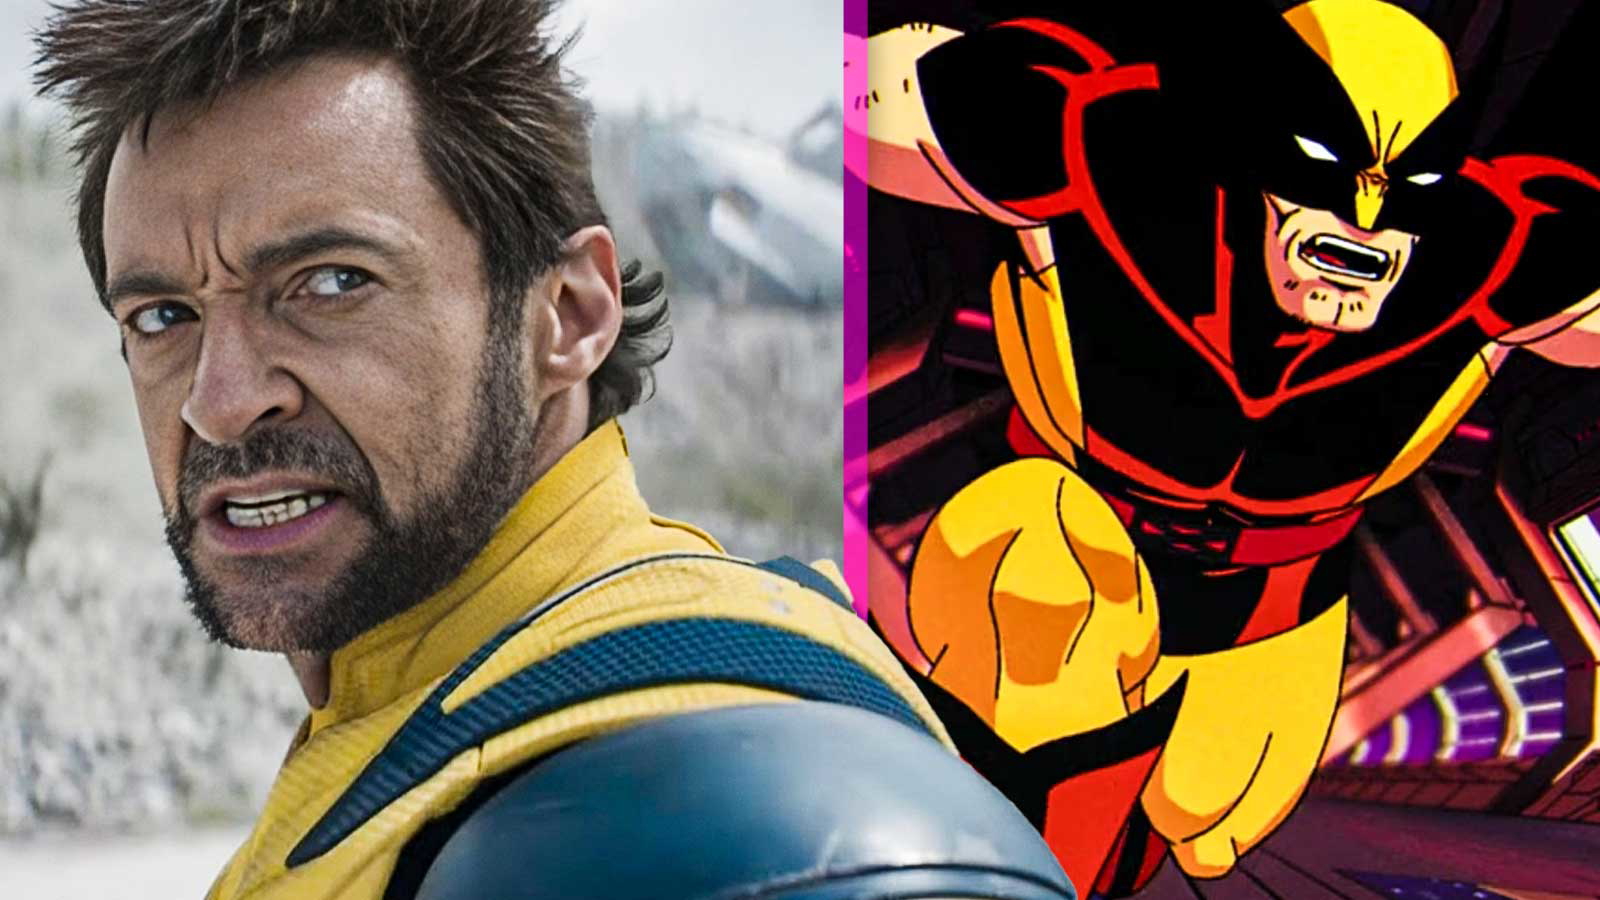 “It was super bold of them”: Hugh Jackman’s Wolverine Costume Gets Dissed for Being Too Whacky Despite Fans Screaming for a Comic-Accurate Suit for Years